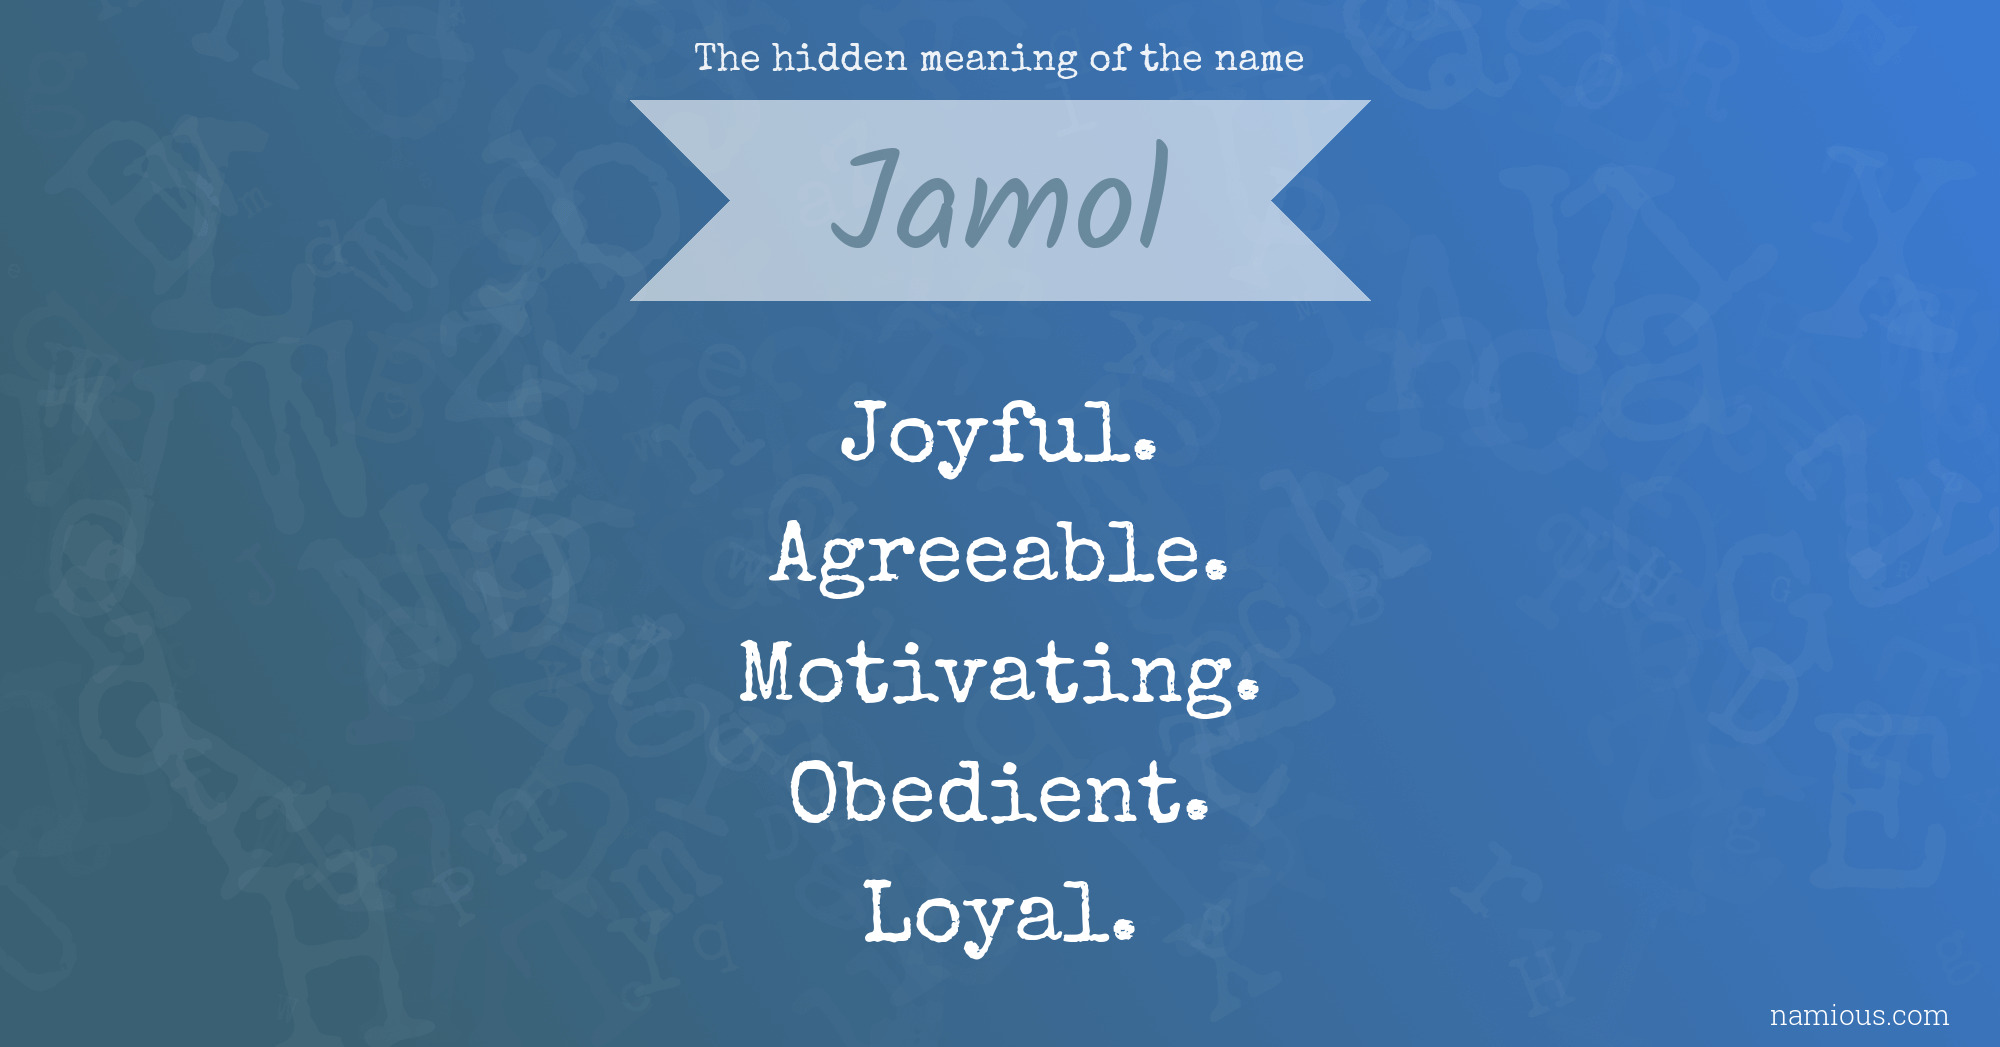 The hidden meaning of the name Jamol